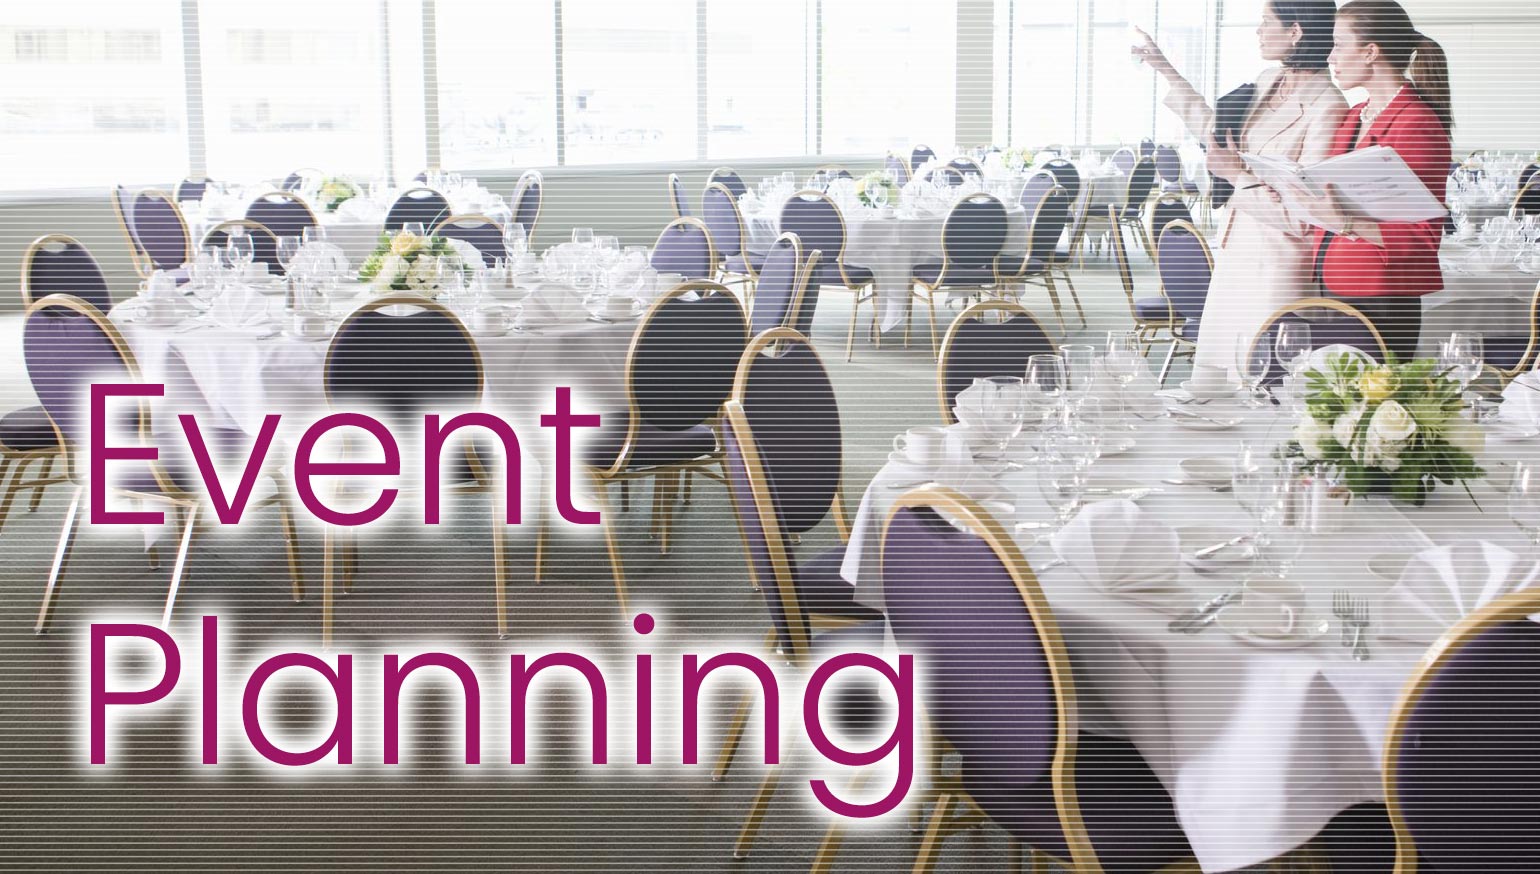 Event Planning services in London and Kent